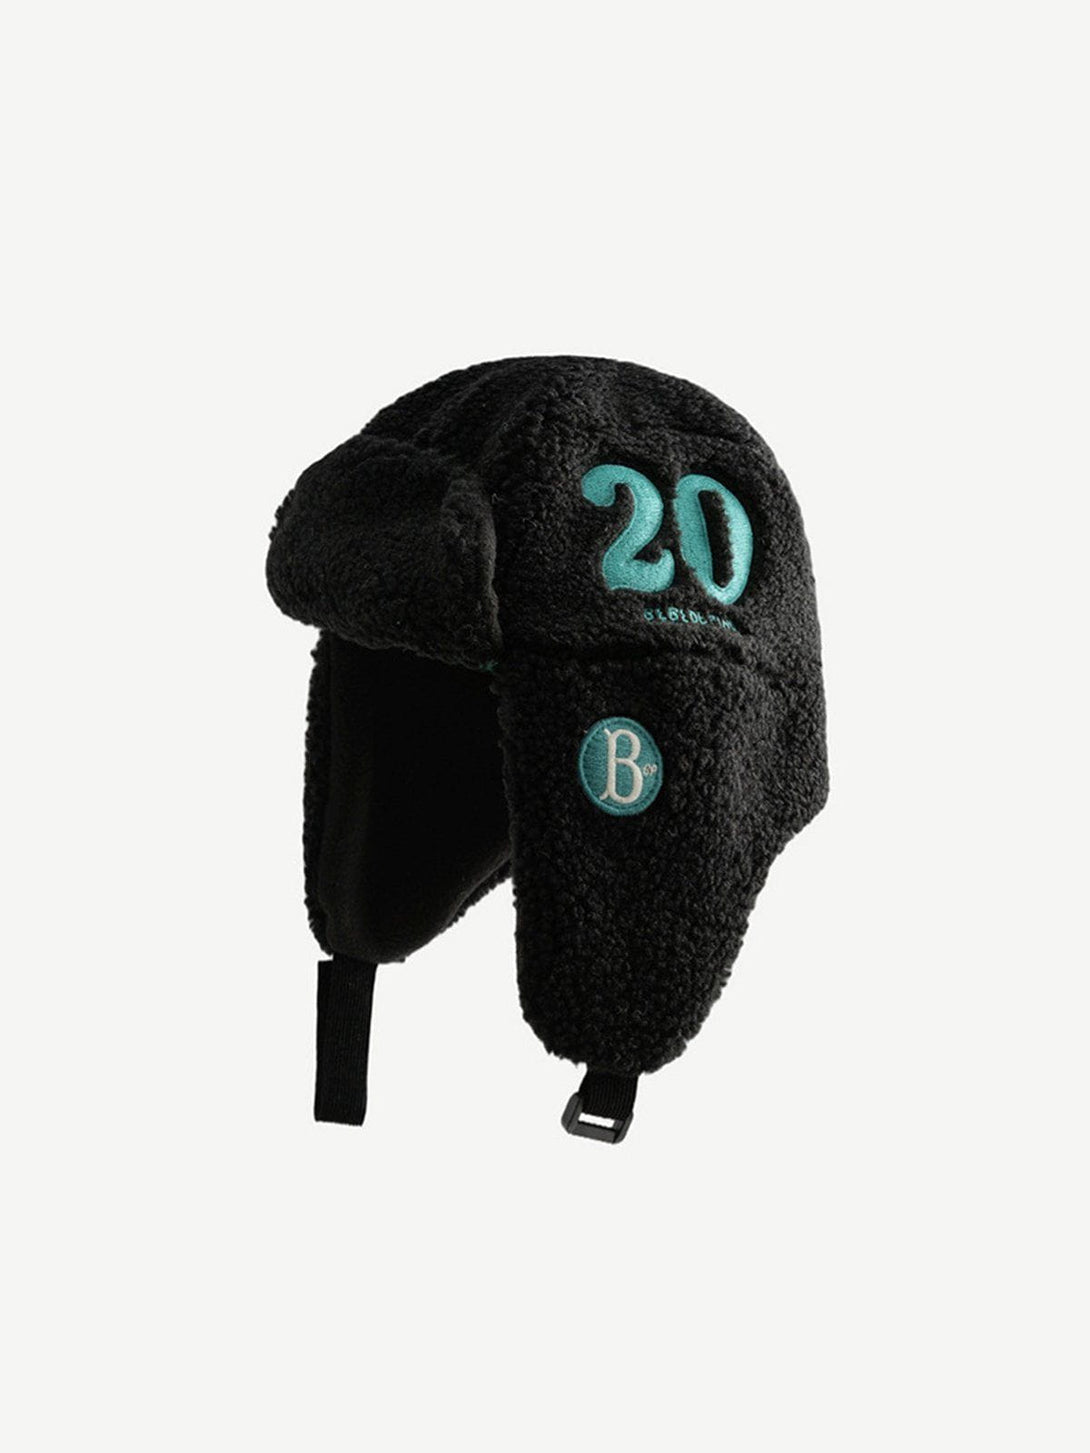 Number 20 Embroidered Sherpa Hat- Outfit Ideas - Streetwear Fashion - majesda.com